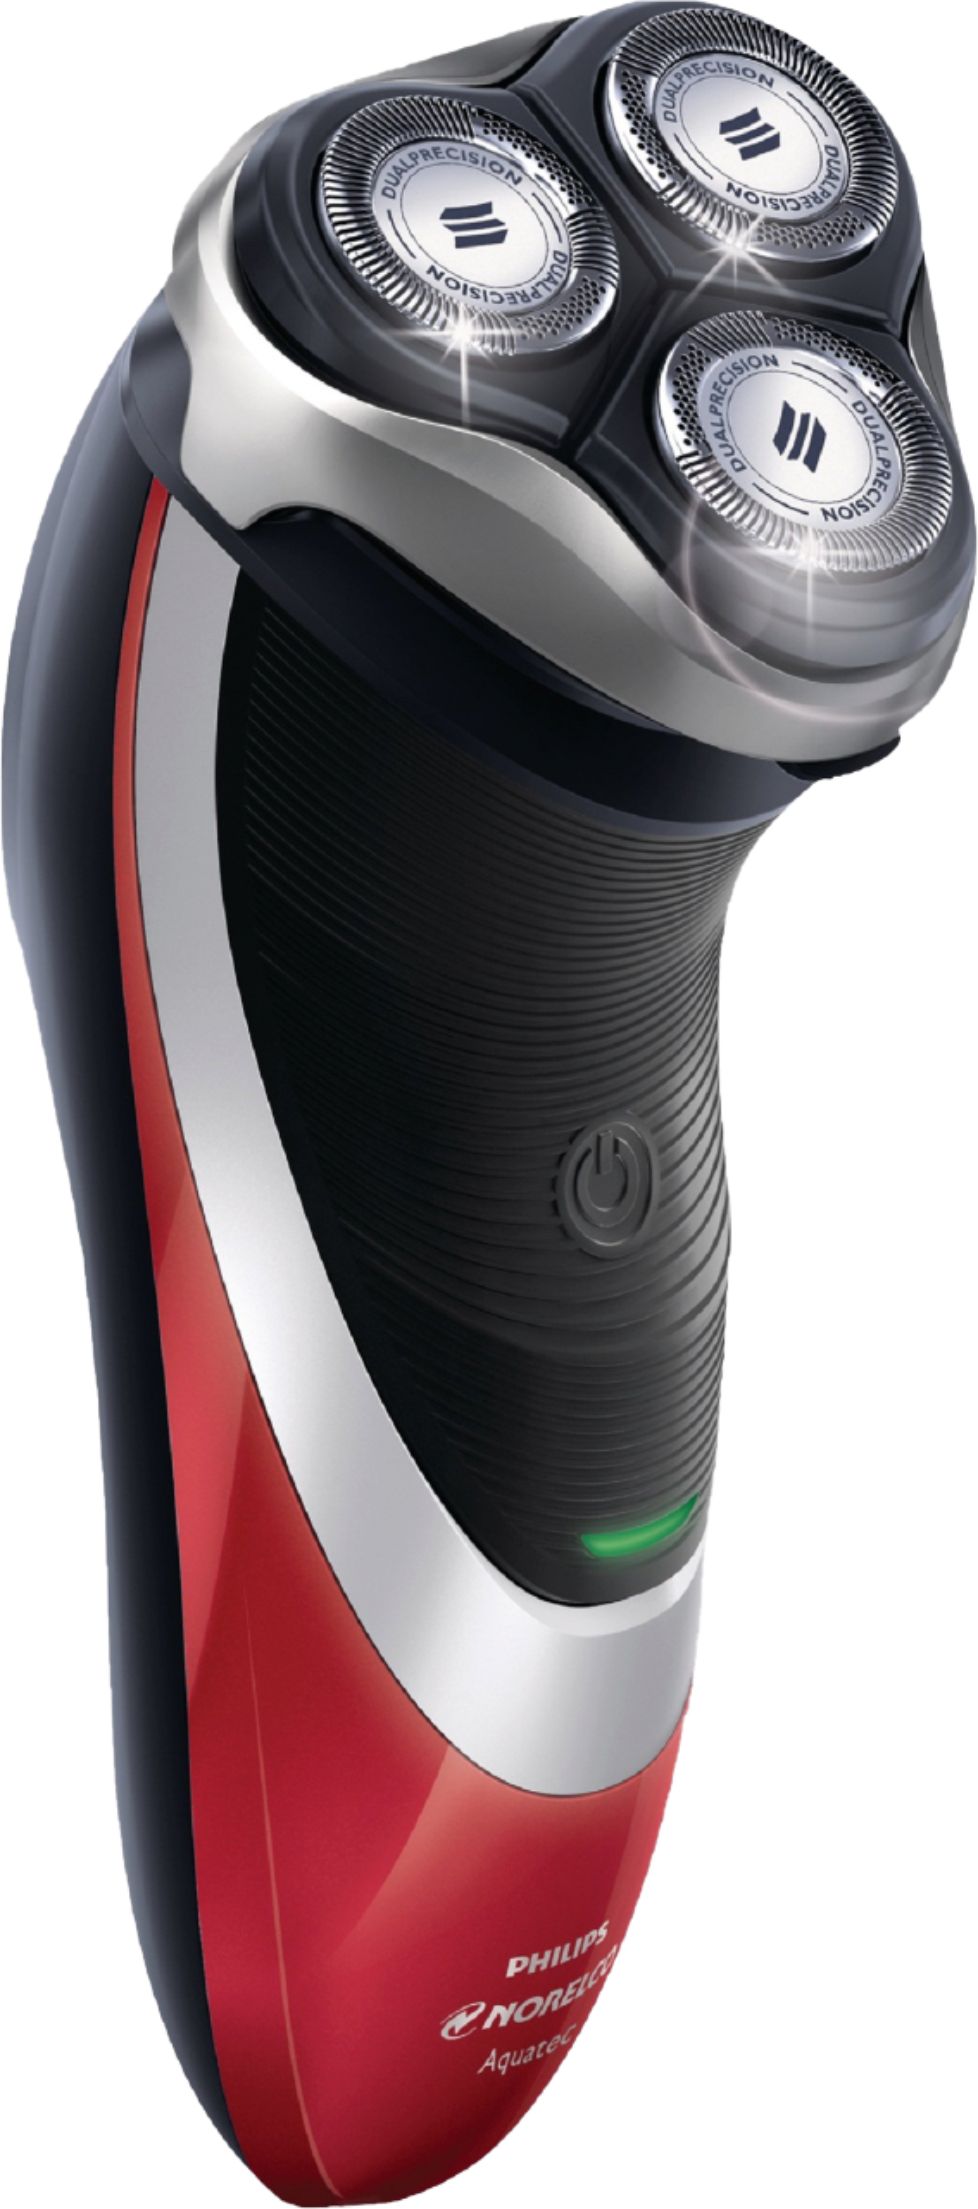 Philips Norelco Shaver 6500 Review - YouTube